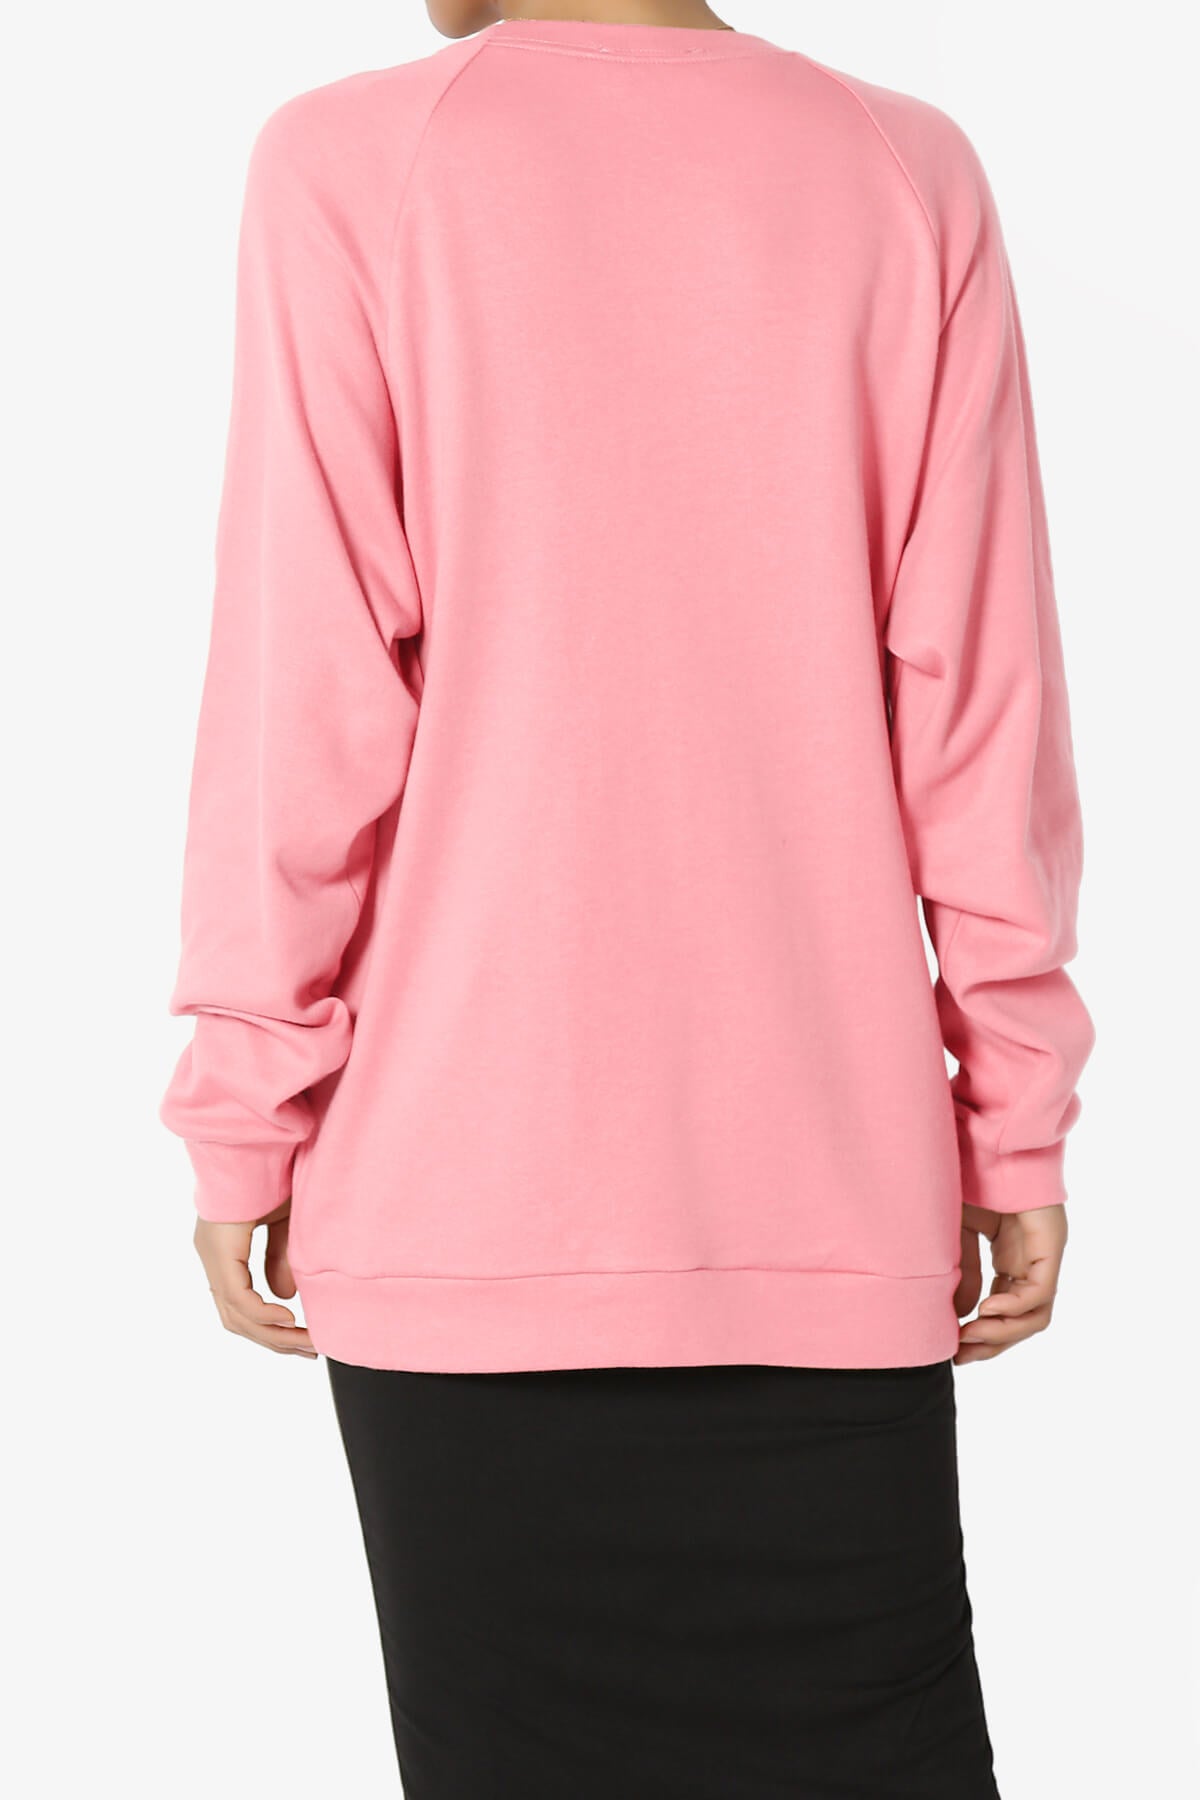 Load image into Gallery viewer, Carlene Cotton Raglan Sleeve Pullover Top BRIGHT PINK_2
